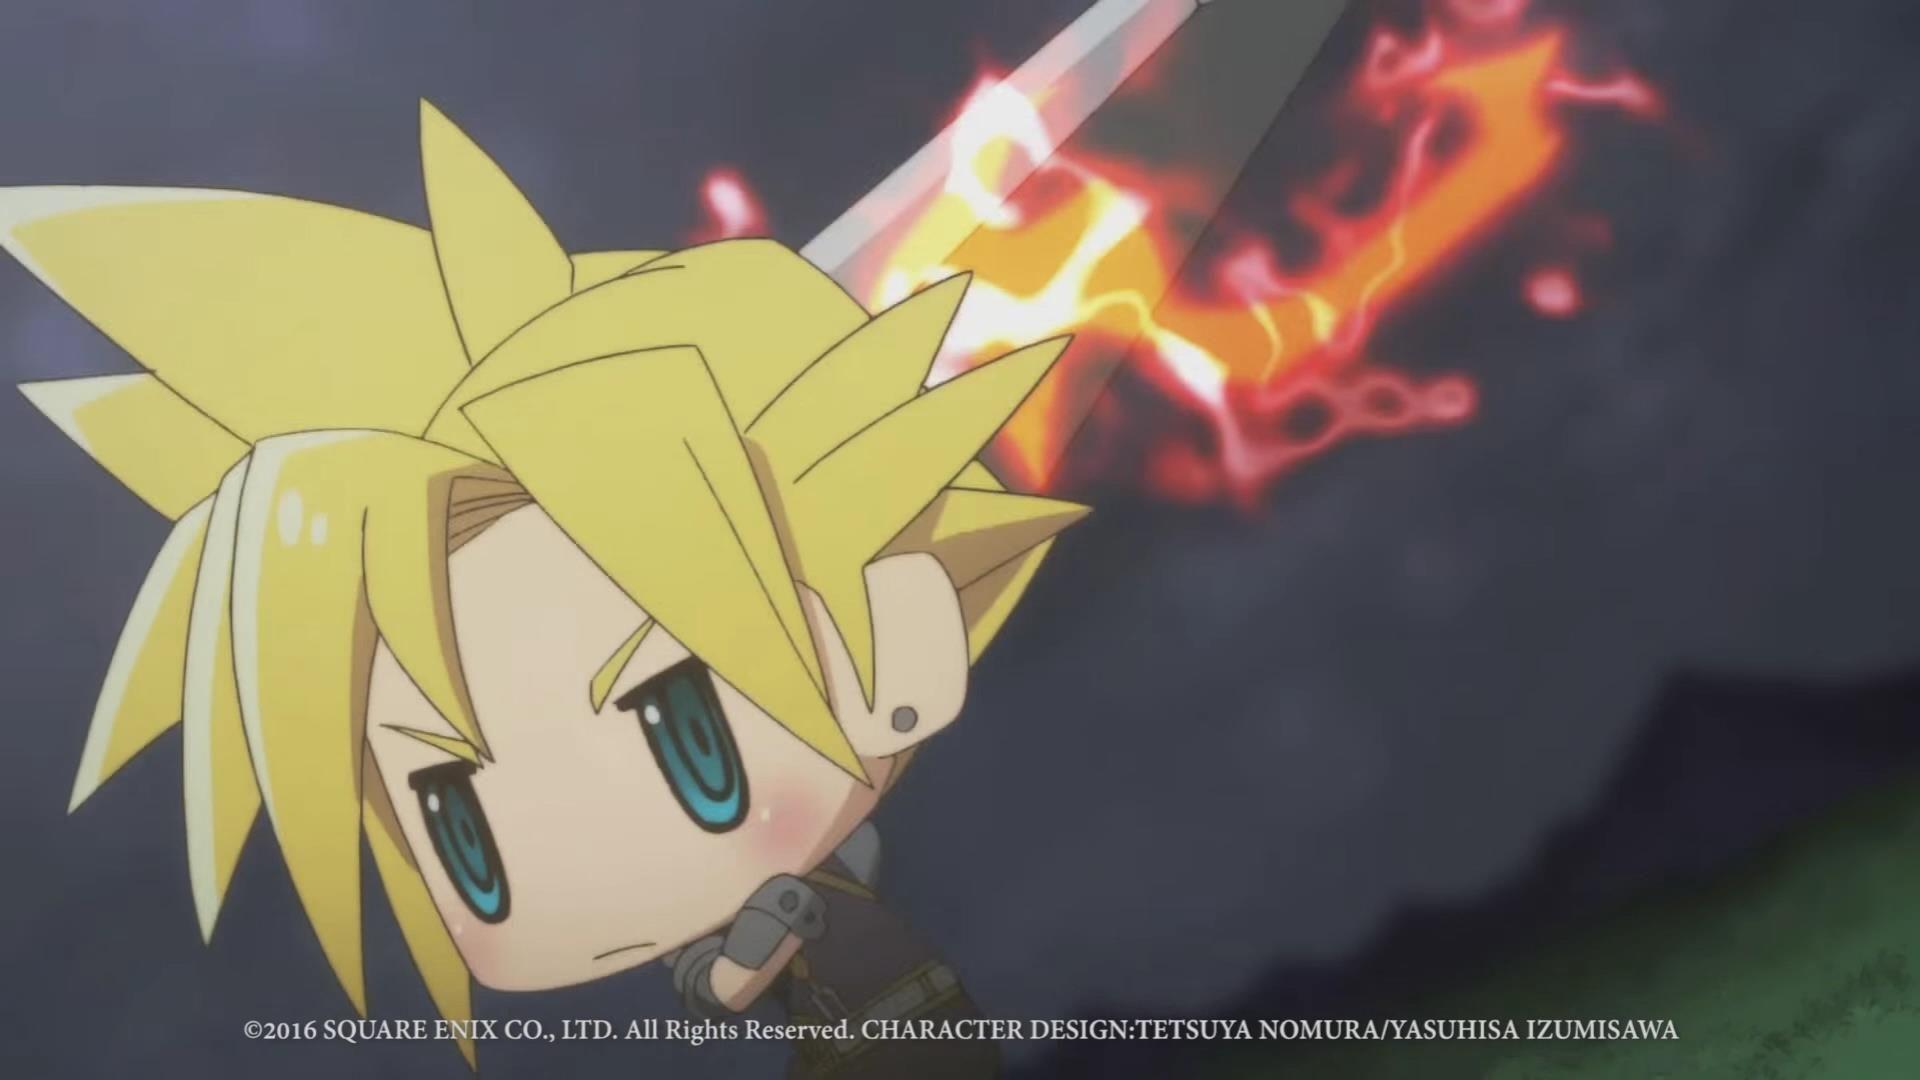 PS4 PS Vita Exclusive World Of Final Fantasy's New Video Shows Theme